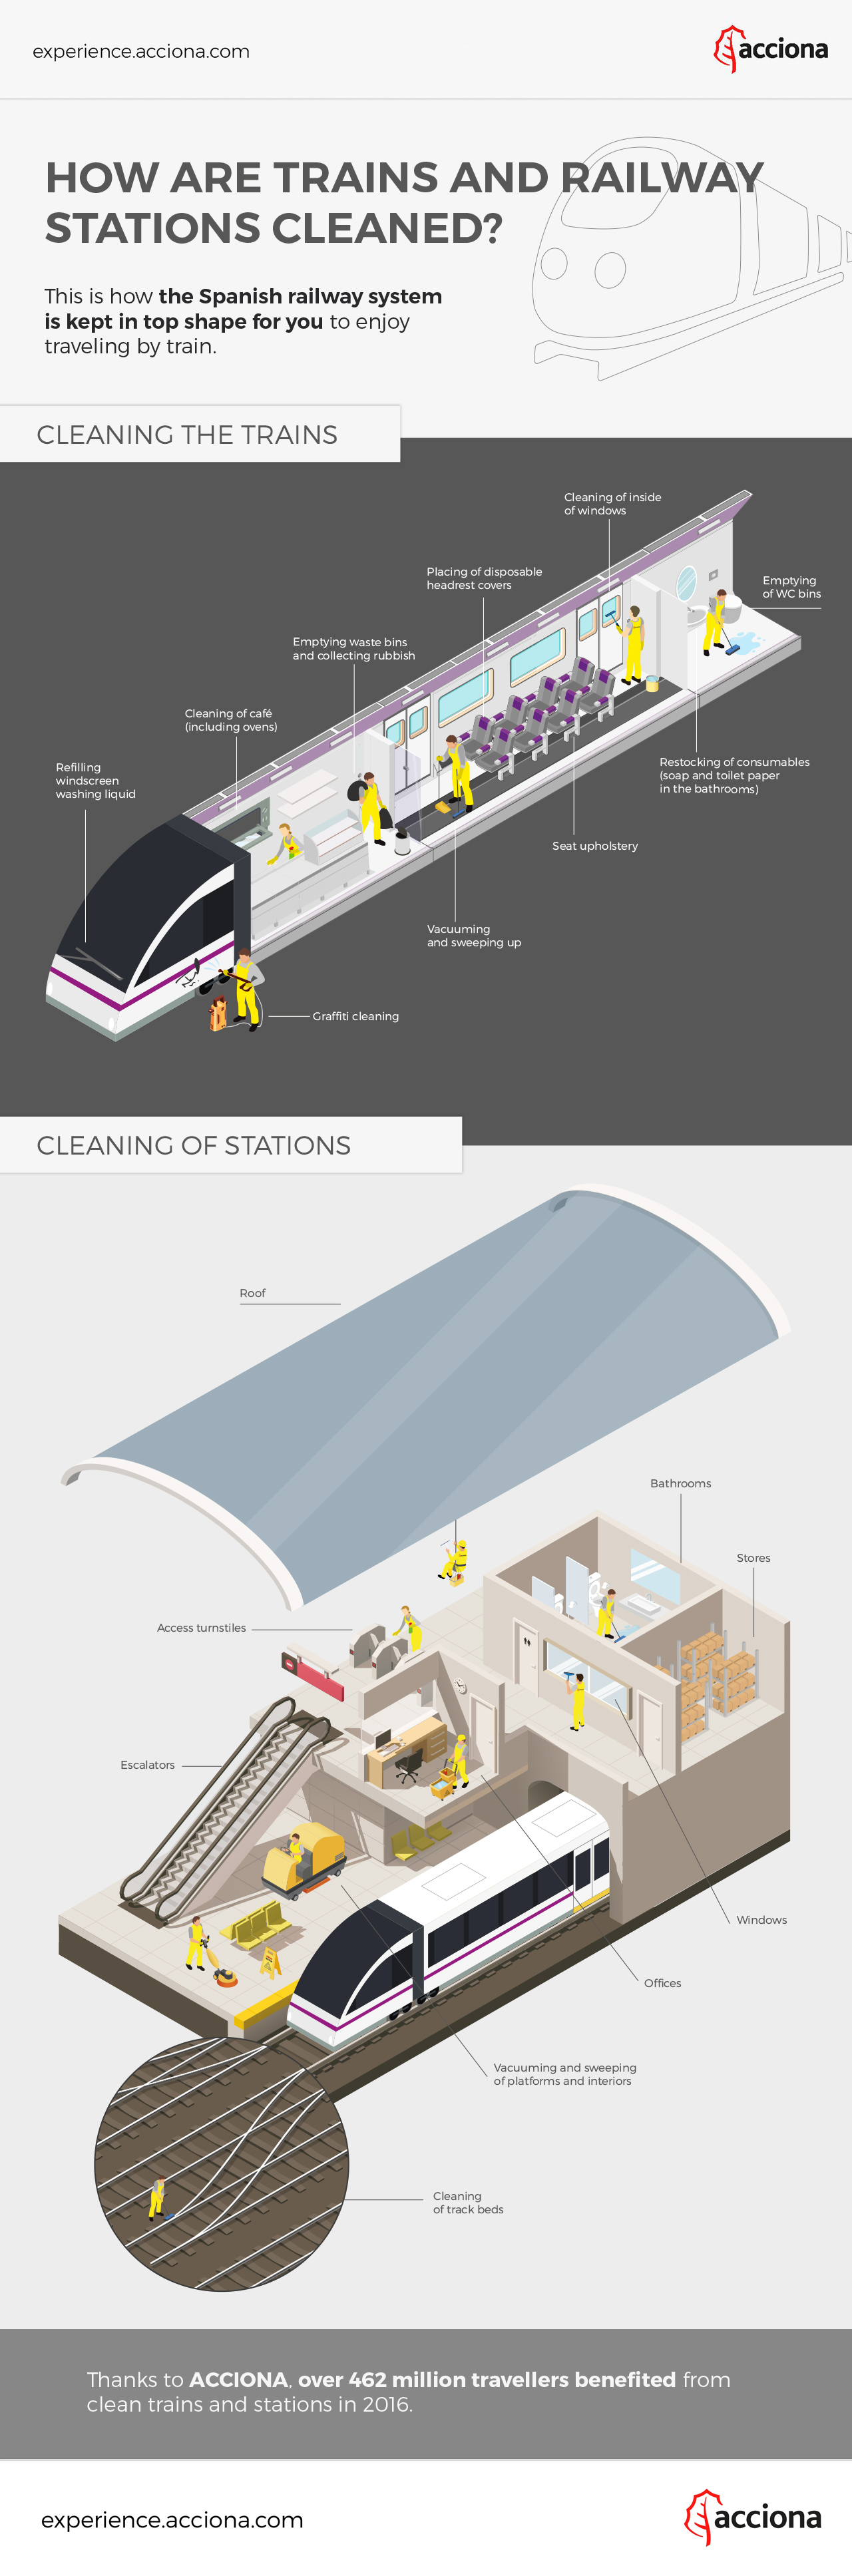 Trains and railwa stations cleaning infographic